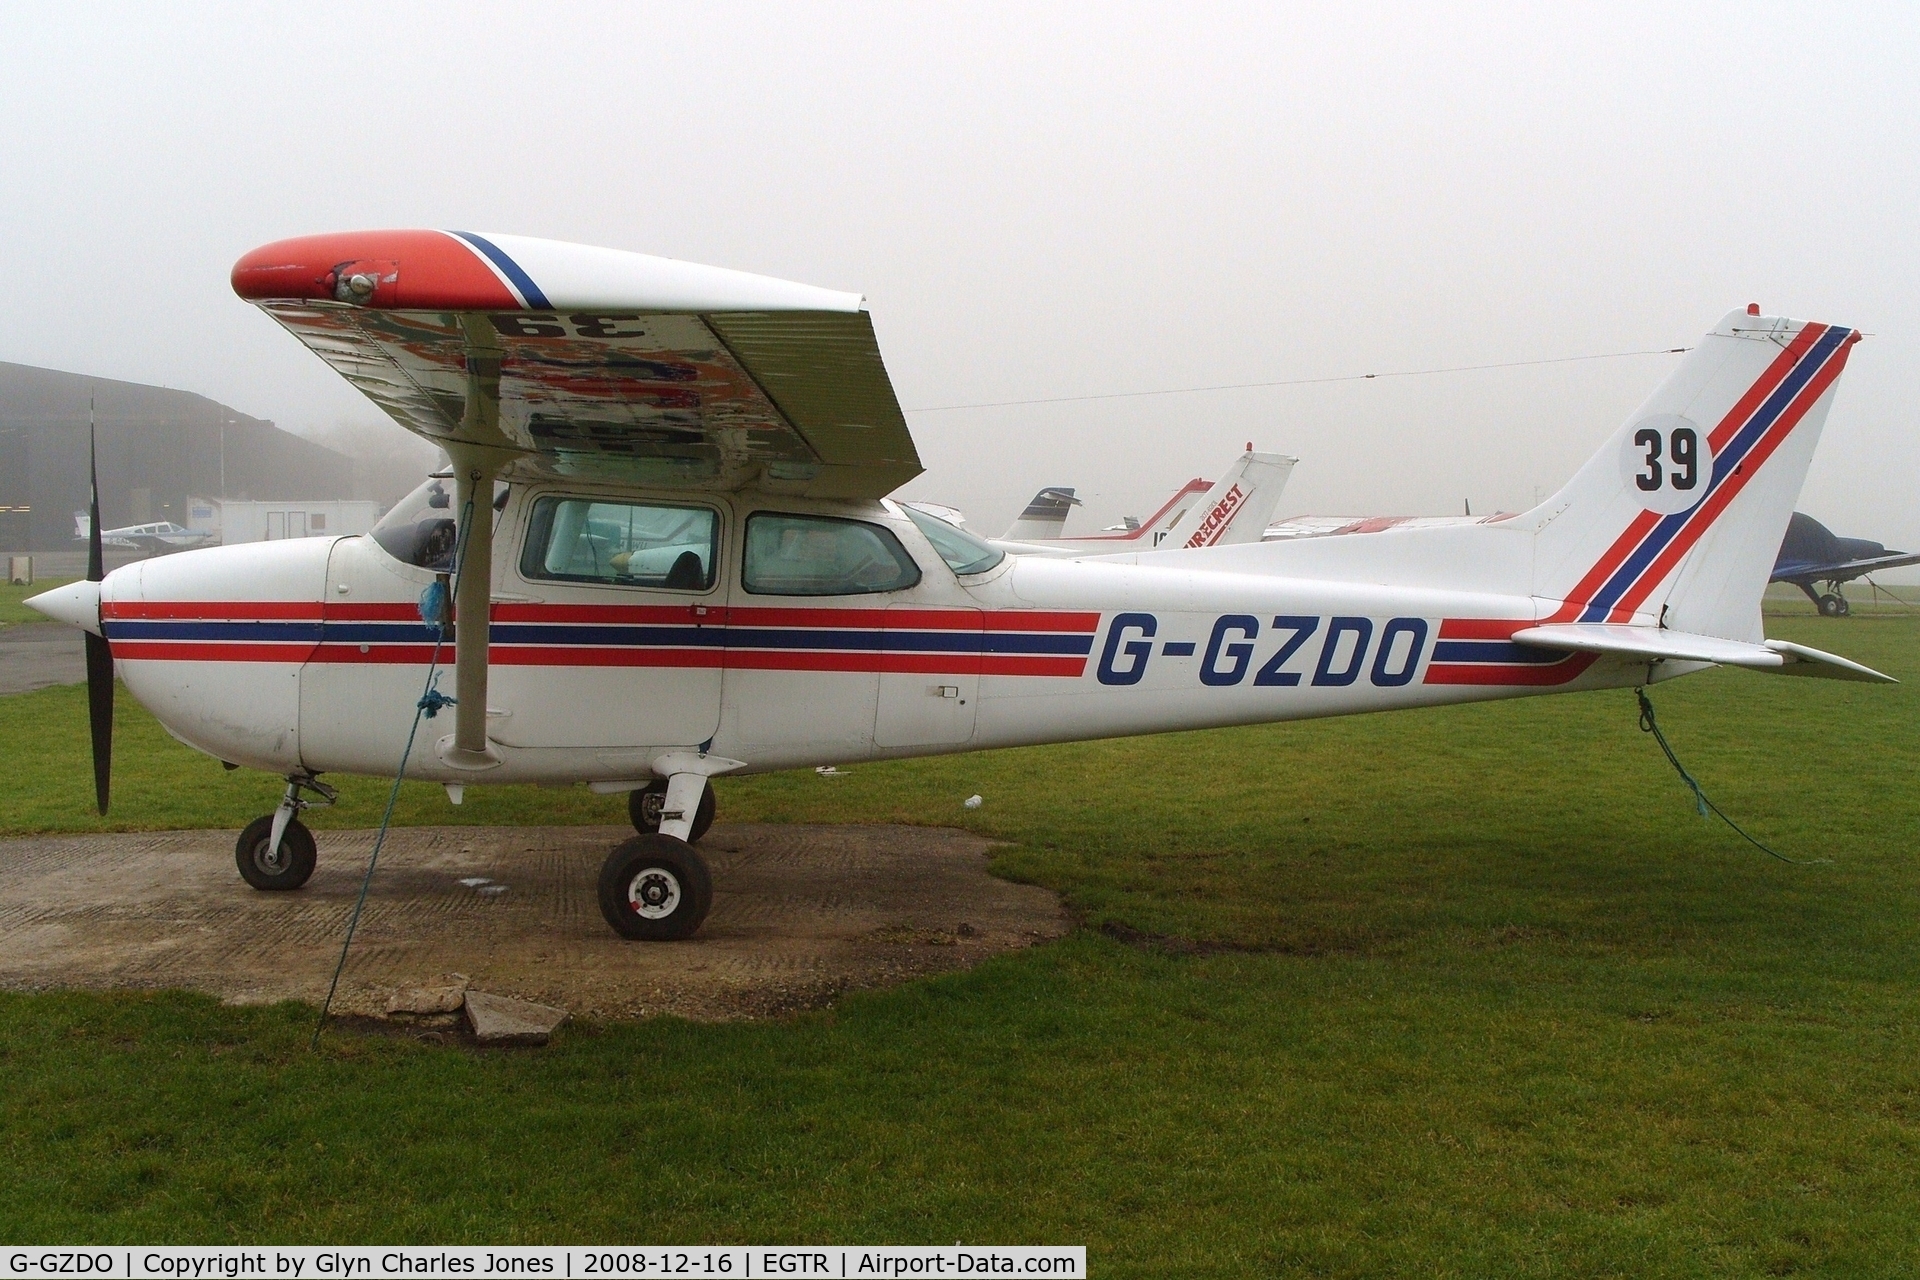 G-GZDO, 1978 Cessna 172N C/N 172-71826, Taken on a quiet cold and foggy day. With thanks to Elstree control tower who granted me authority to take photographs on the aerodrome. Previously C-GZDO. Sporting '39'. Owned by Cambridge Hall Aviation.